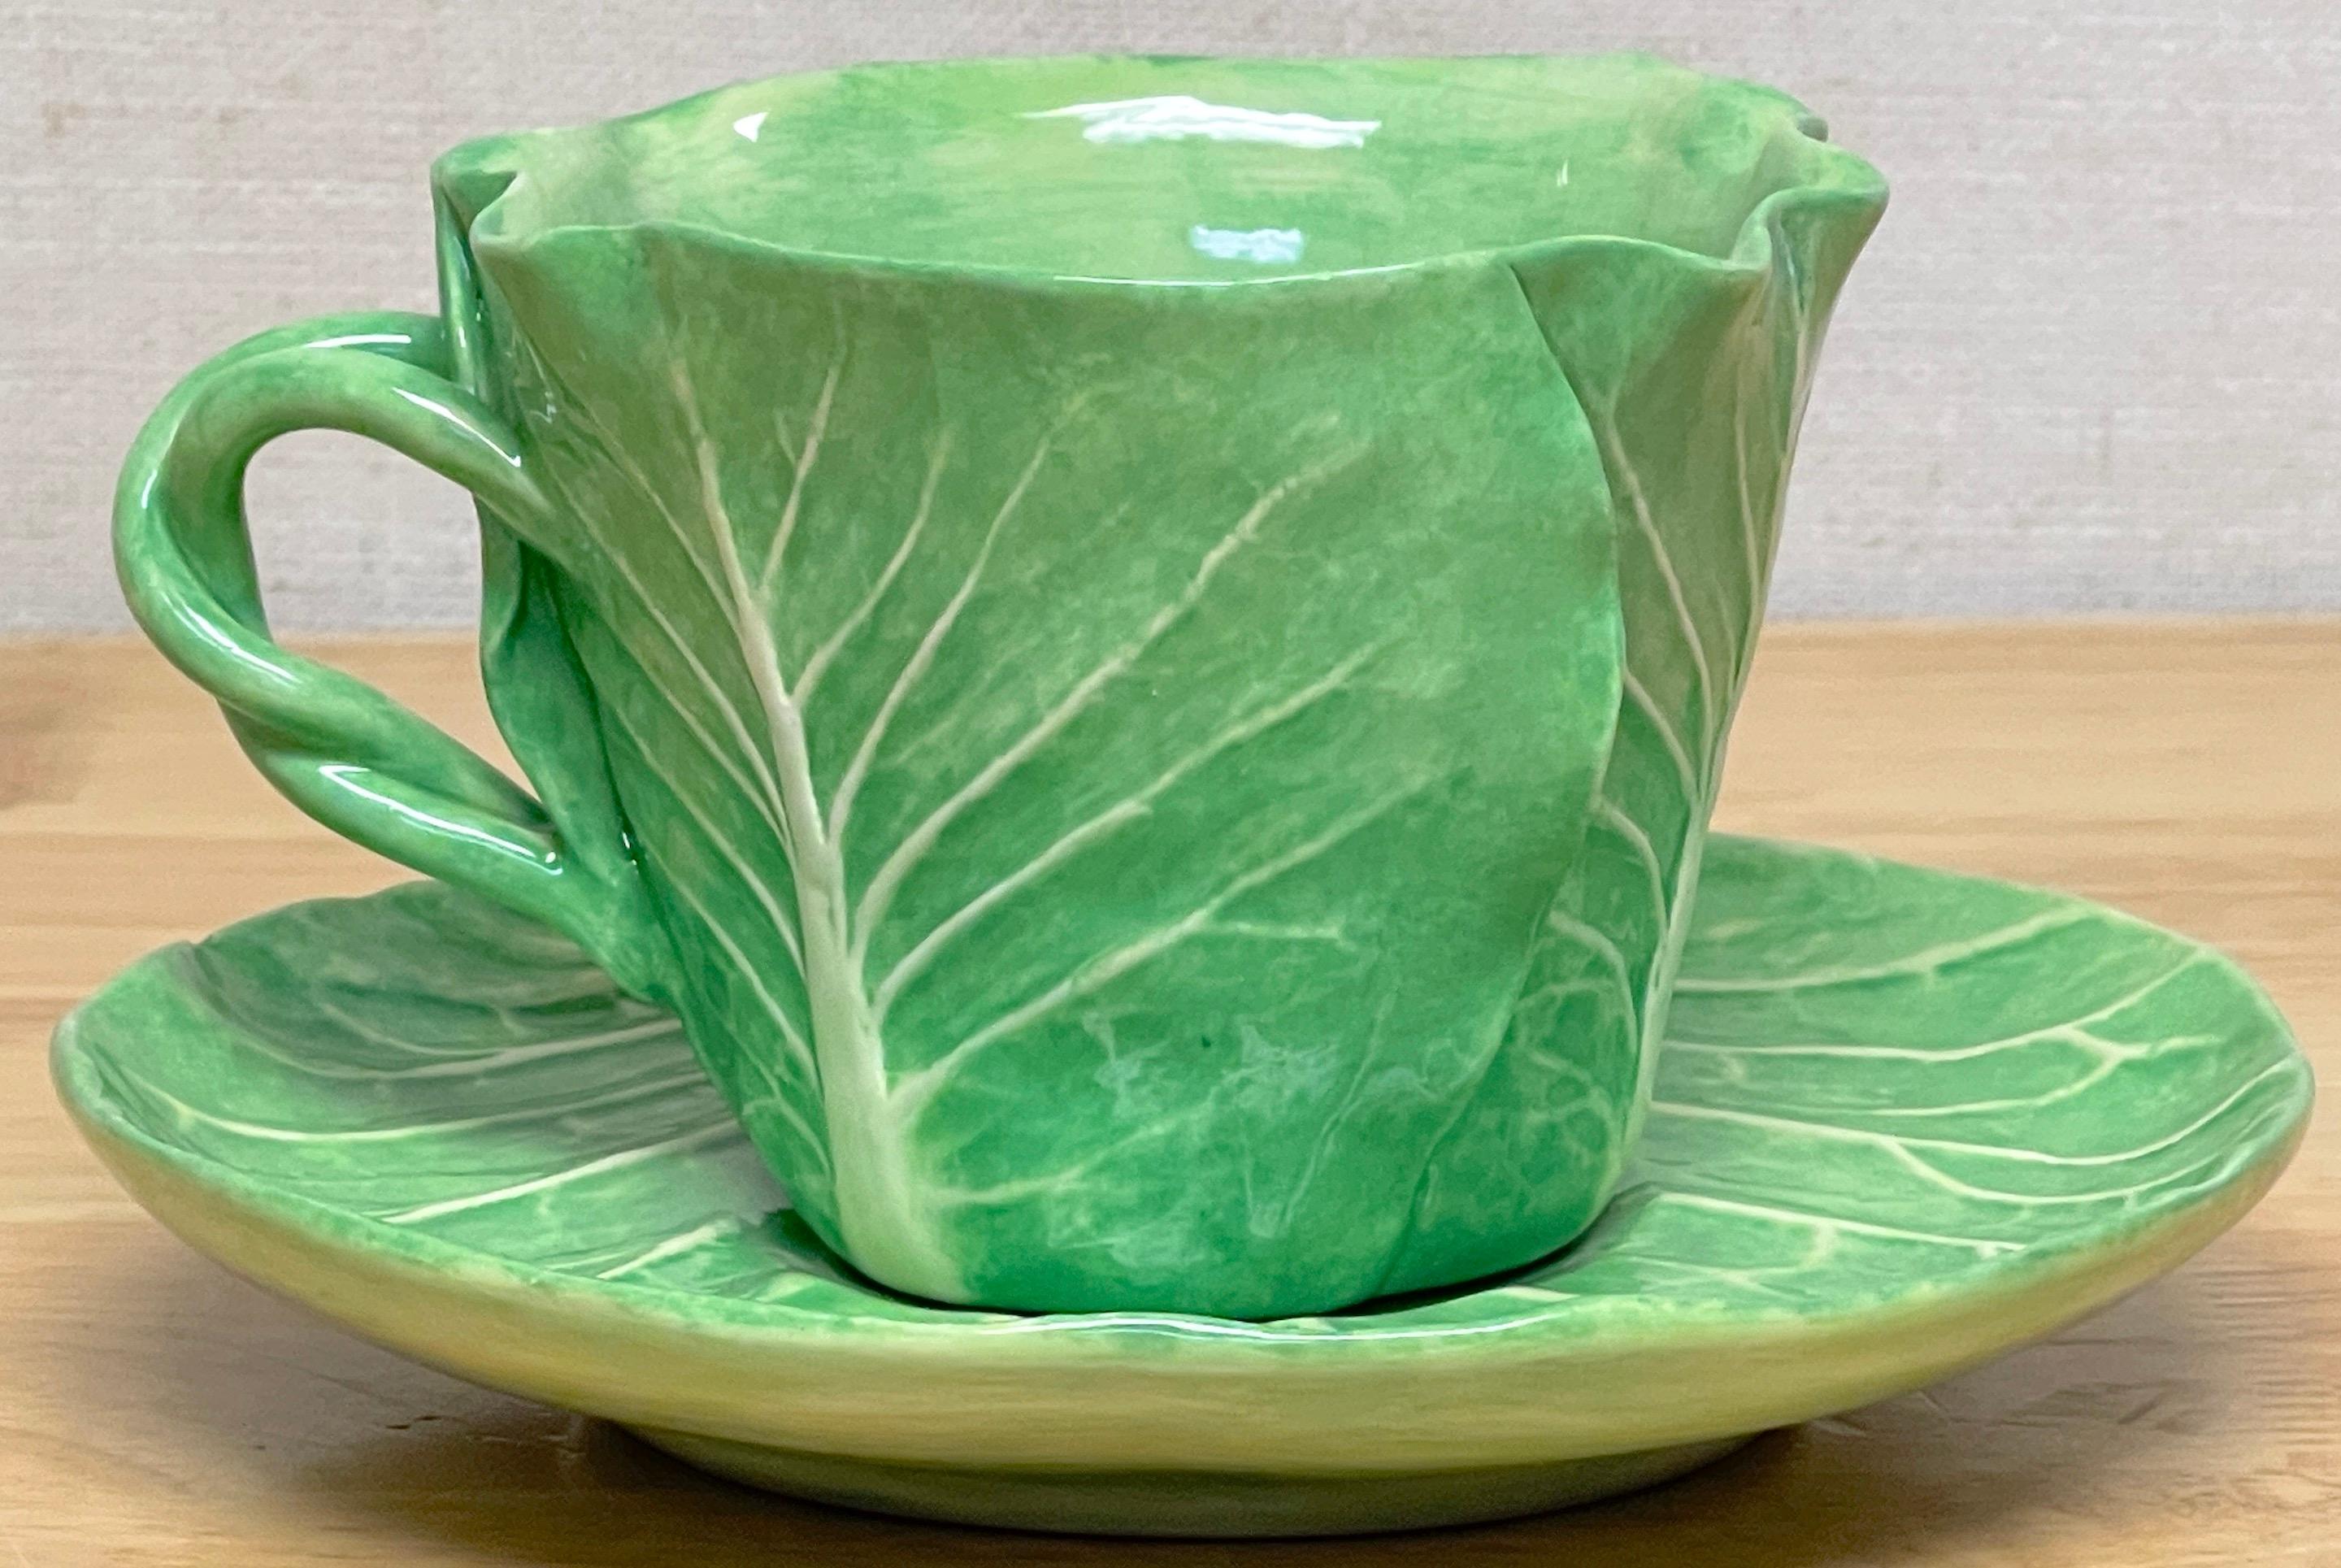 Dodie Thayer 'Jumbo' Lettuce Leaf Cup & Saucer, 5 Available, Sold Individually 4